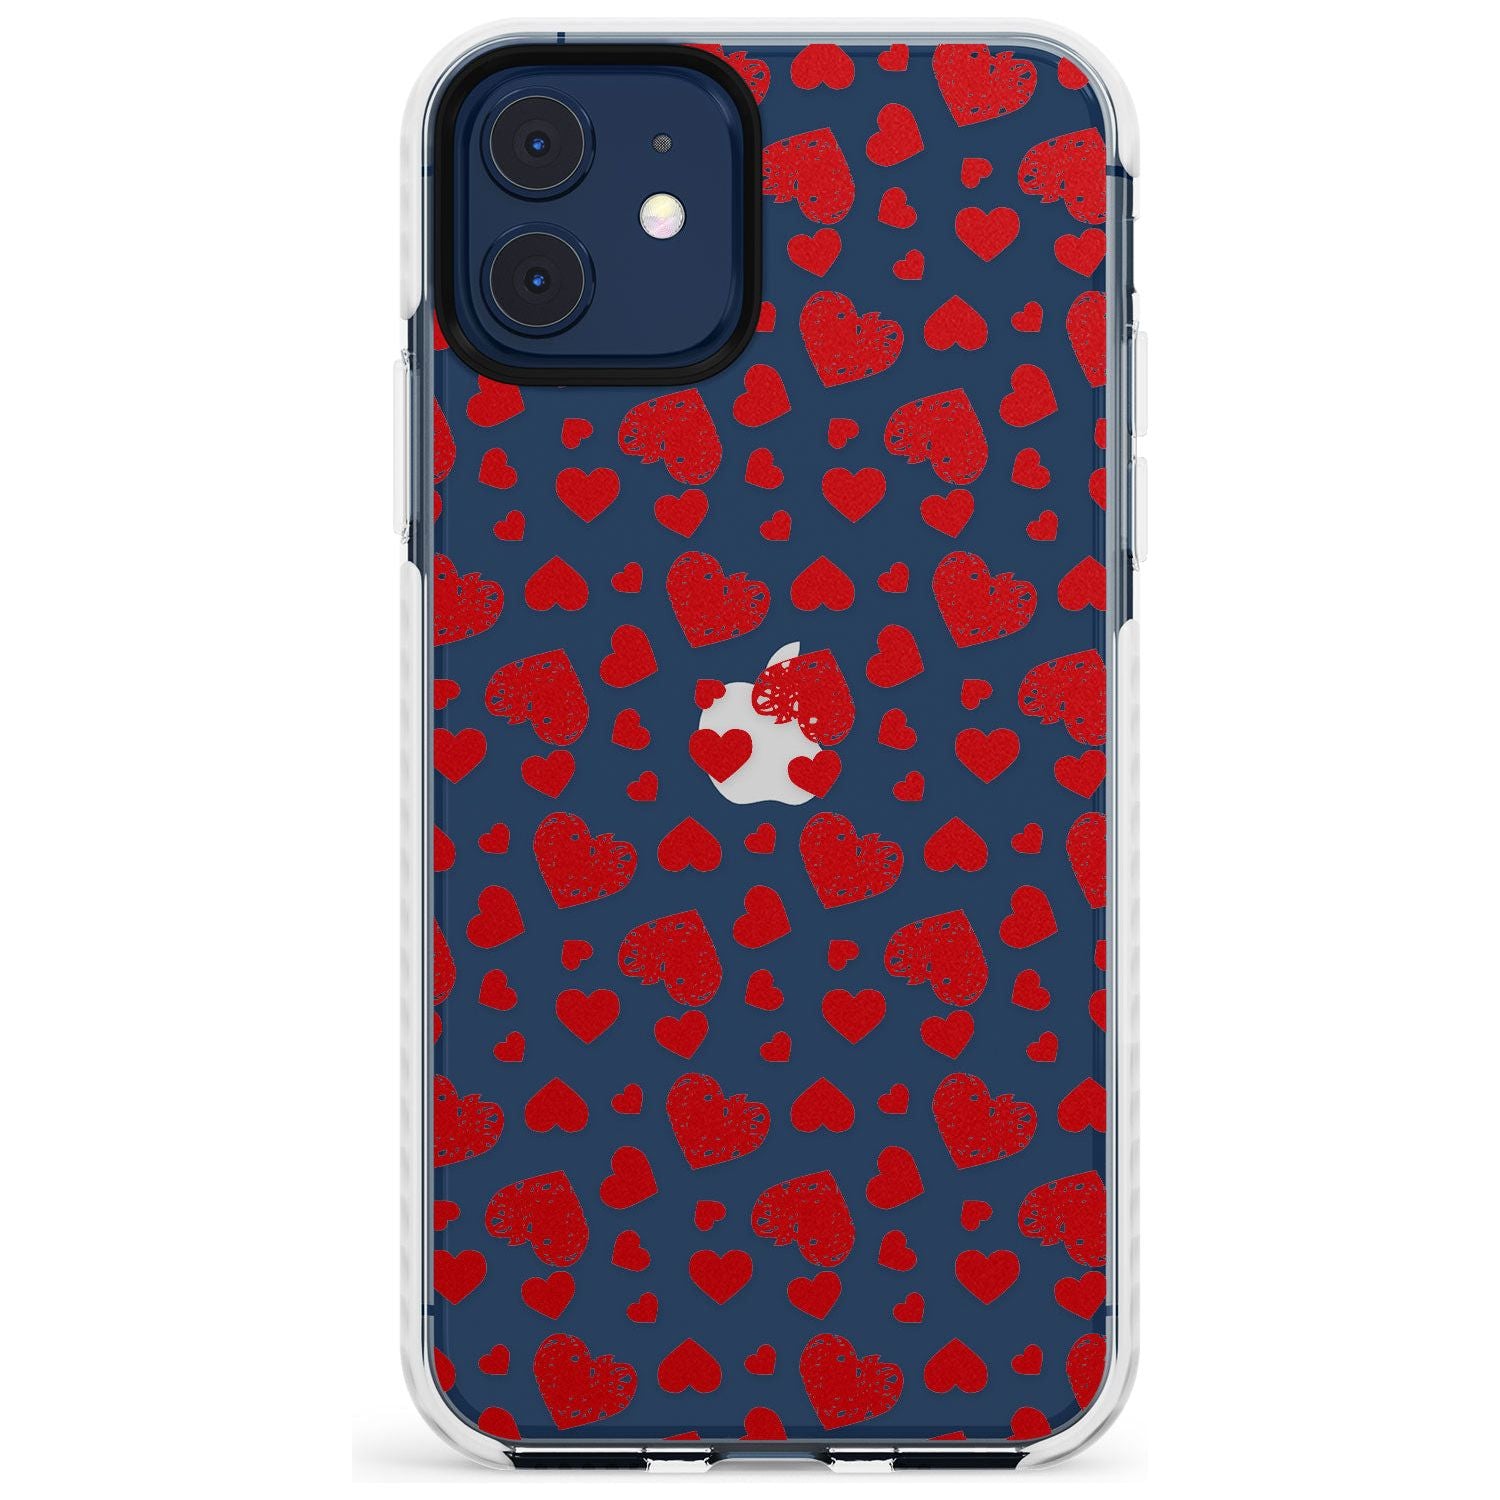 Sketched Heart Pattern Slim TPU Phone Case for iPhone 11